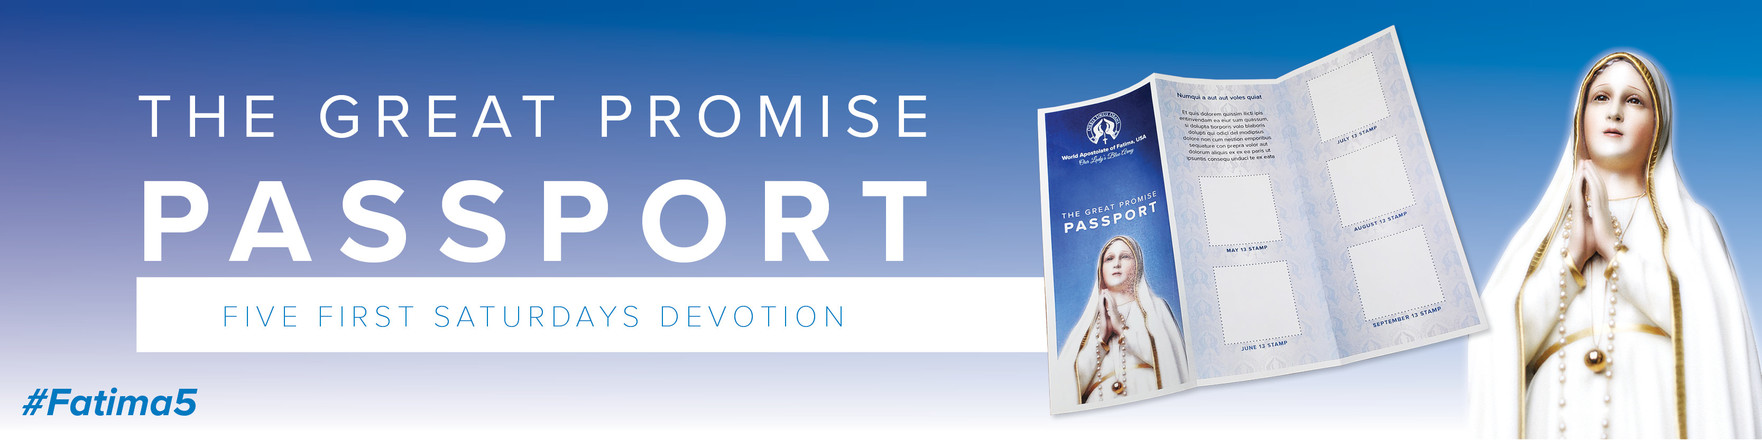 The Great Promise Passport 1600x400 Banner